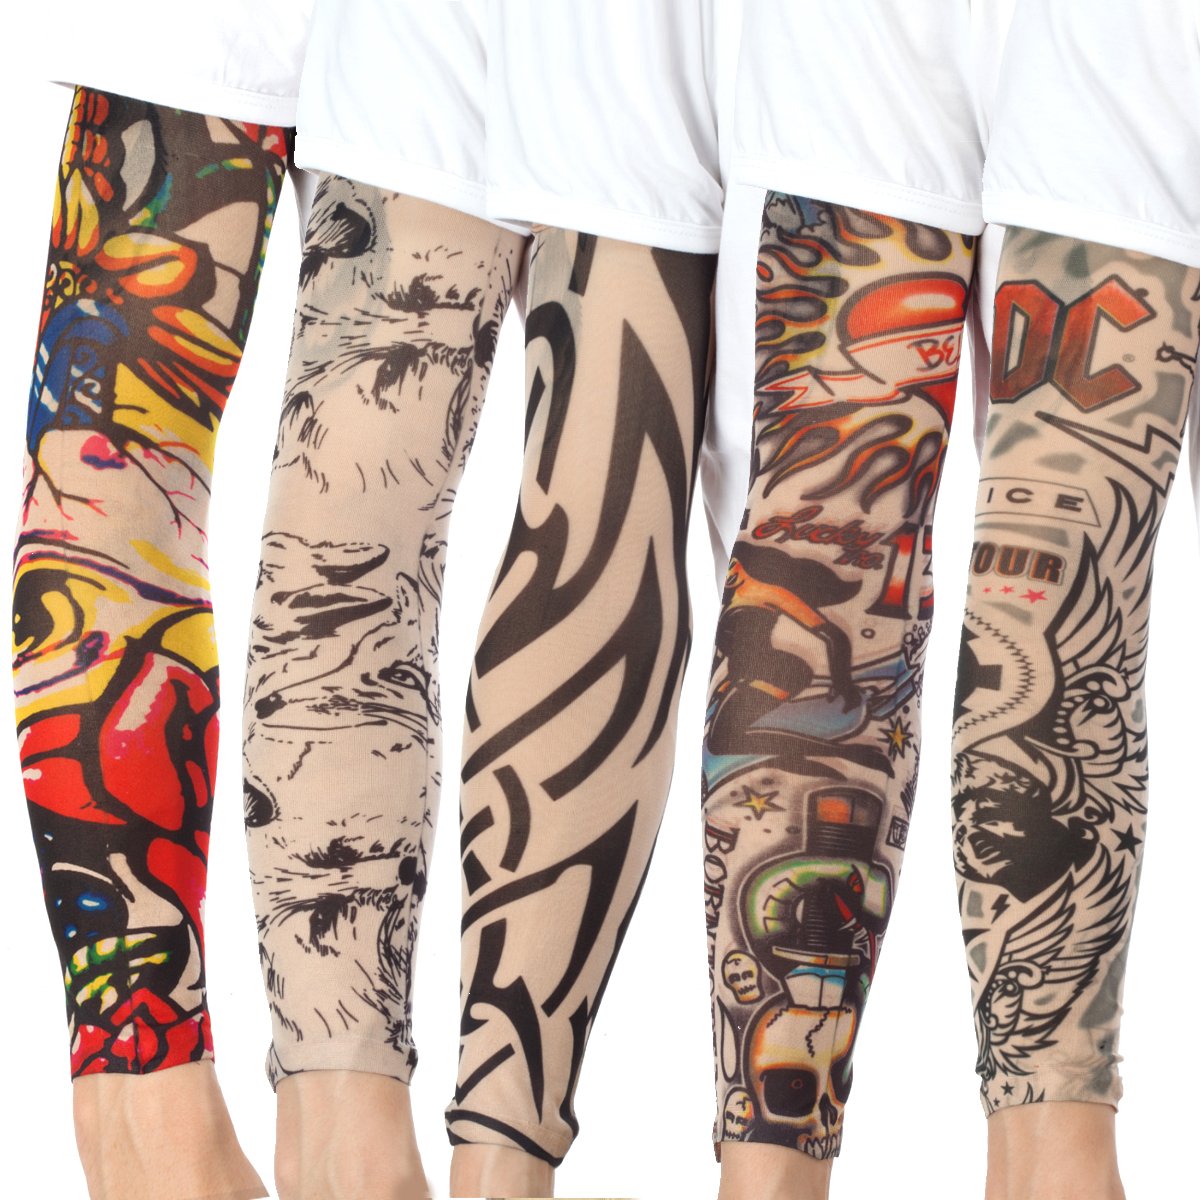 AKStore 20PCS Set Arts Fake Temporary Tattoo Arm Sunscreen Sleeves Designs Tiger, Crown Heart, Skull, Tribal and Etc